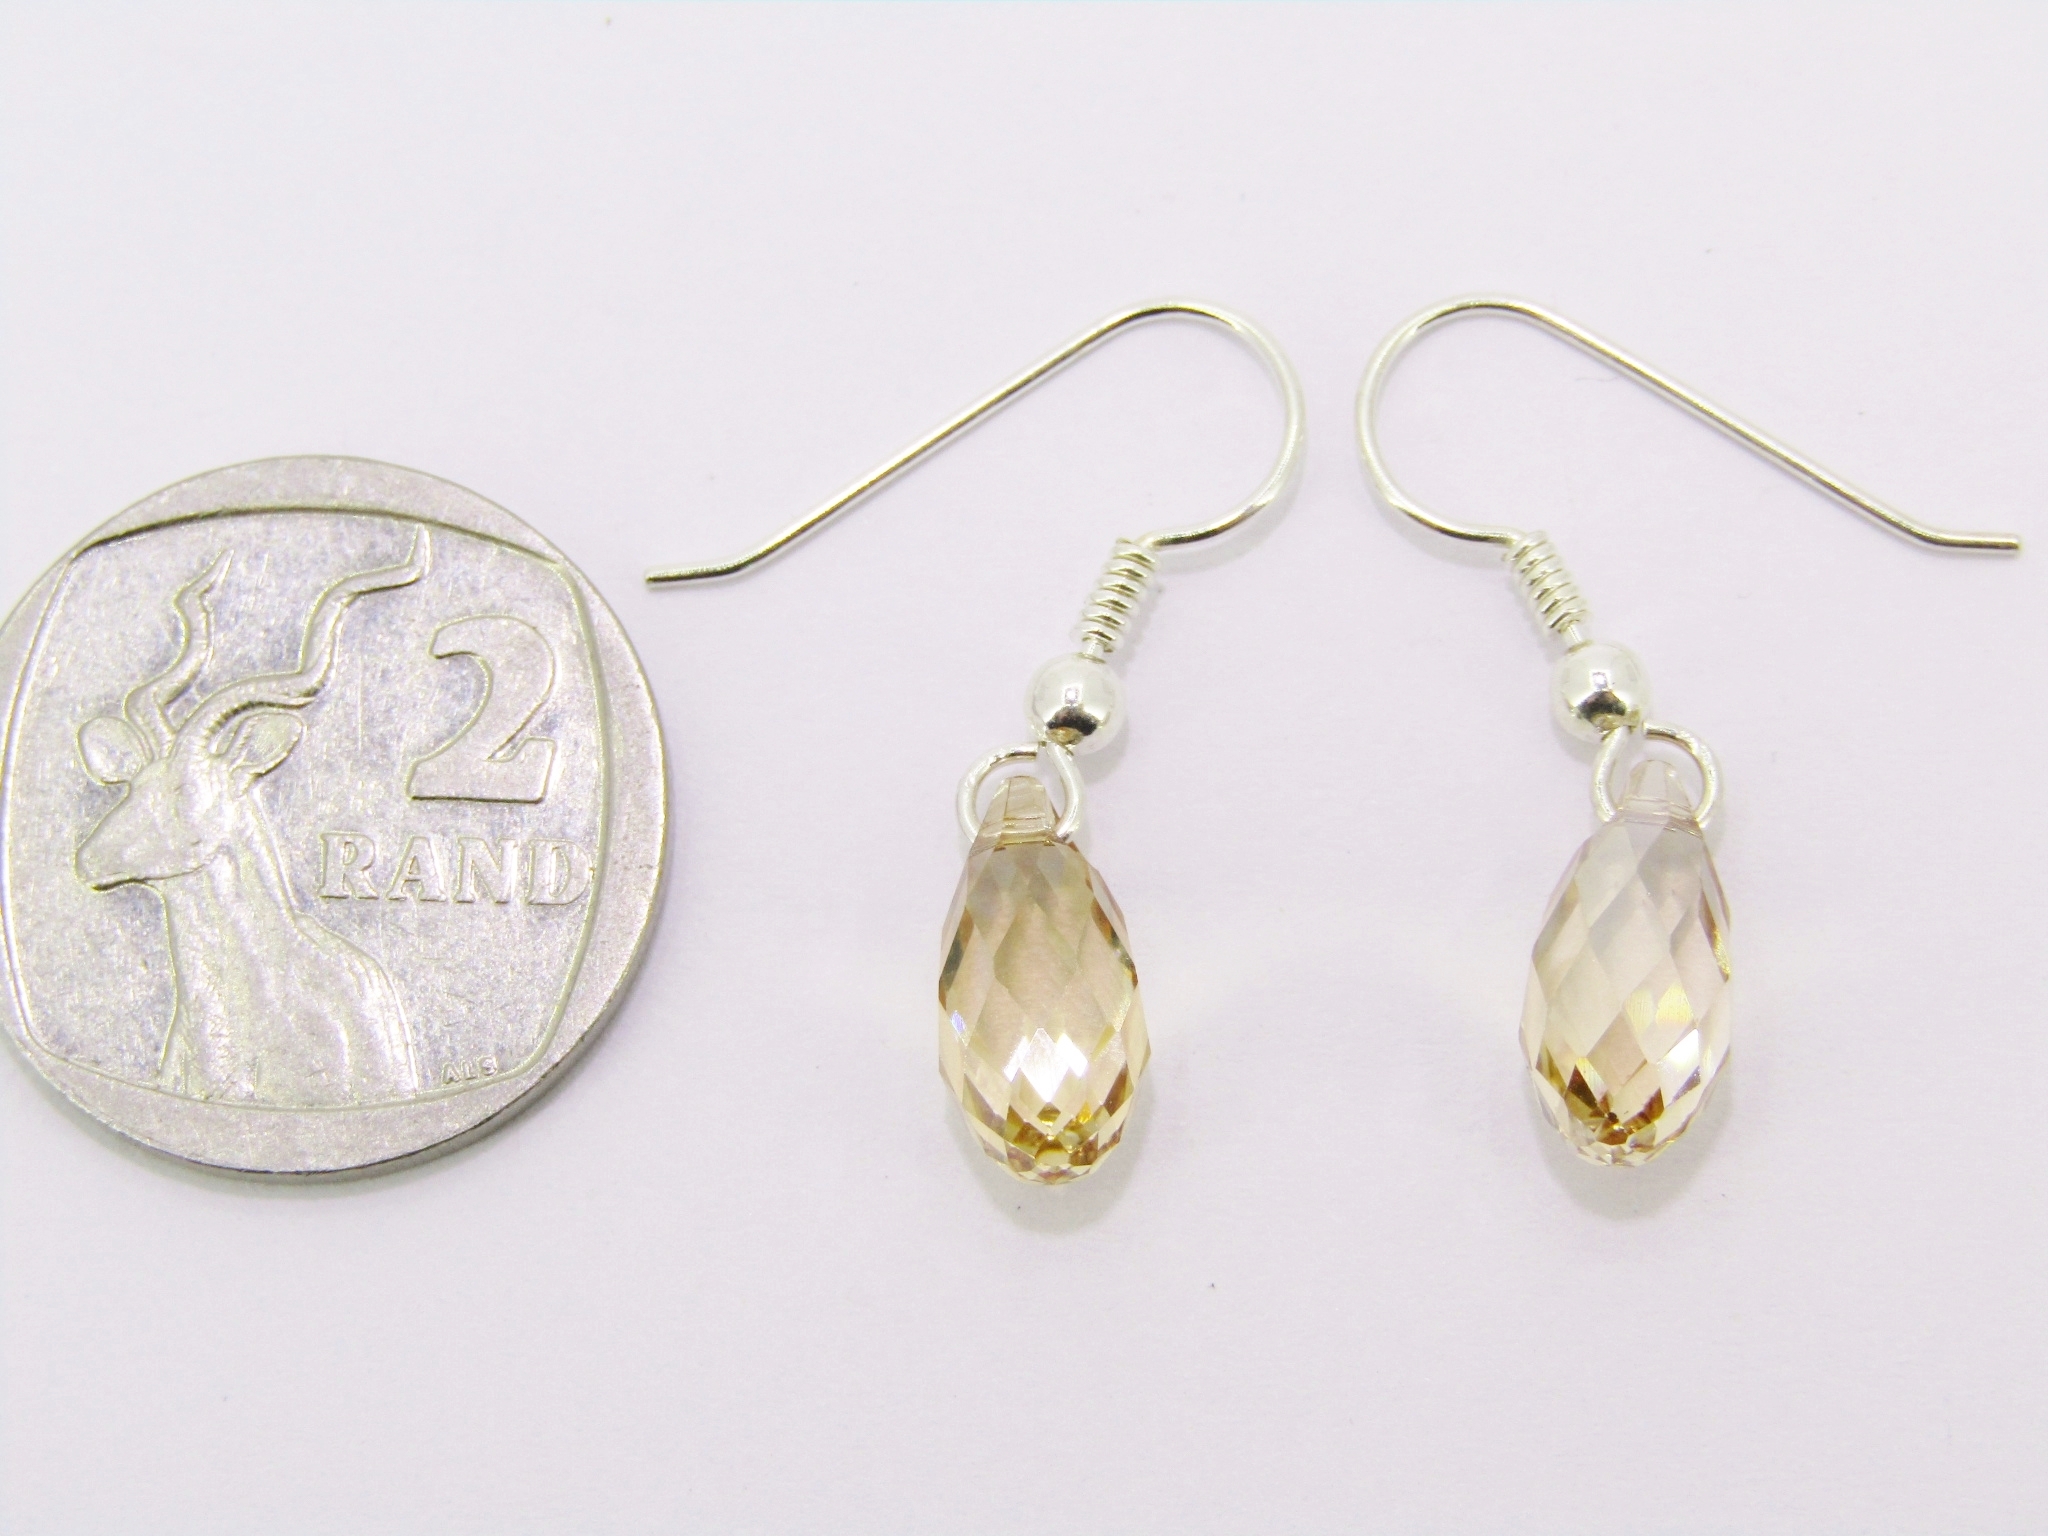 A Beautiful Pair of Champaign Color Swarovski Crystals Drop Earrings in Sterling Silver.